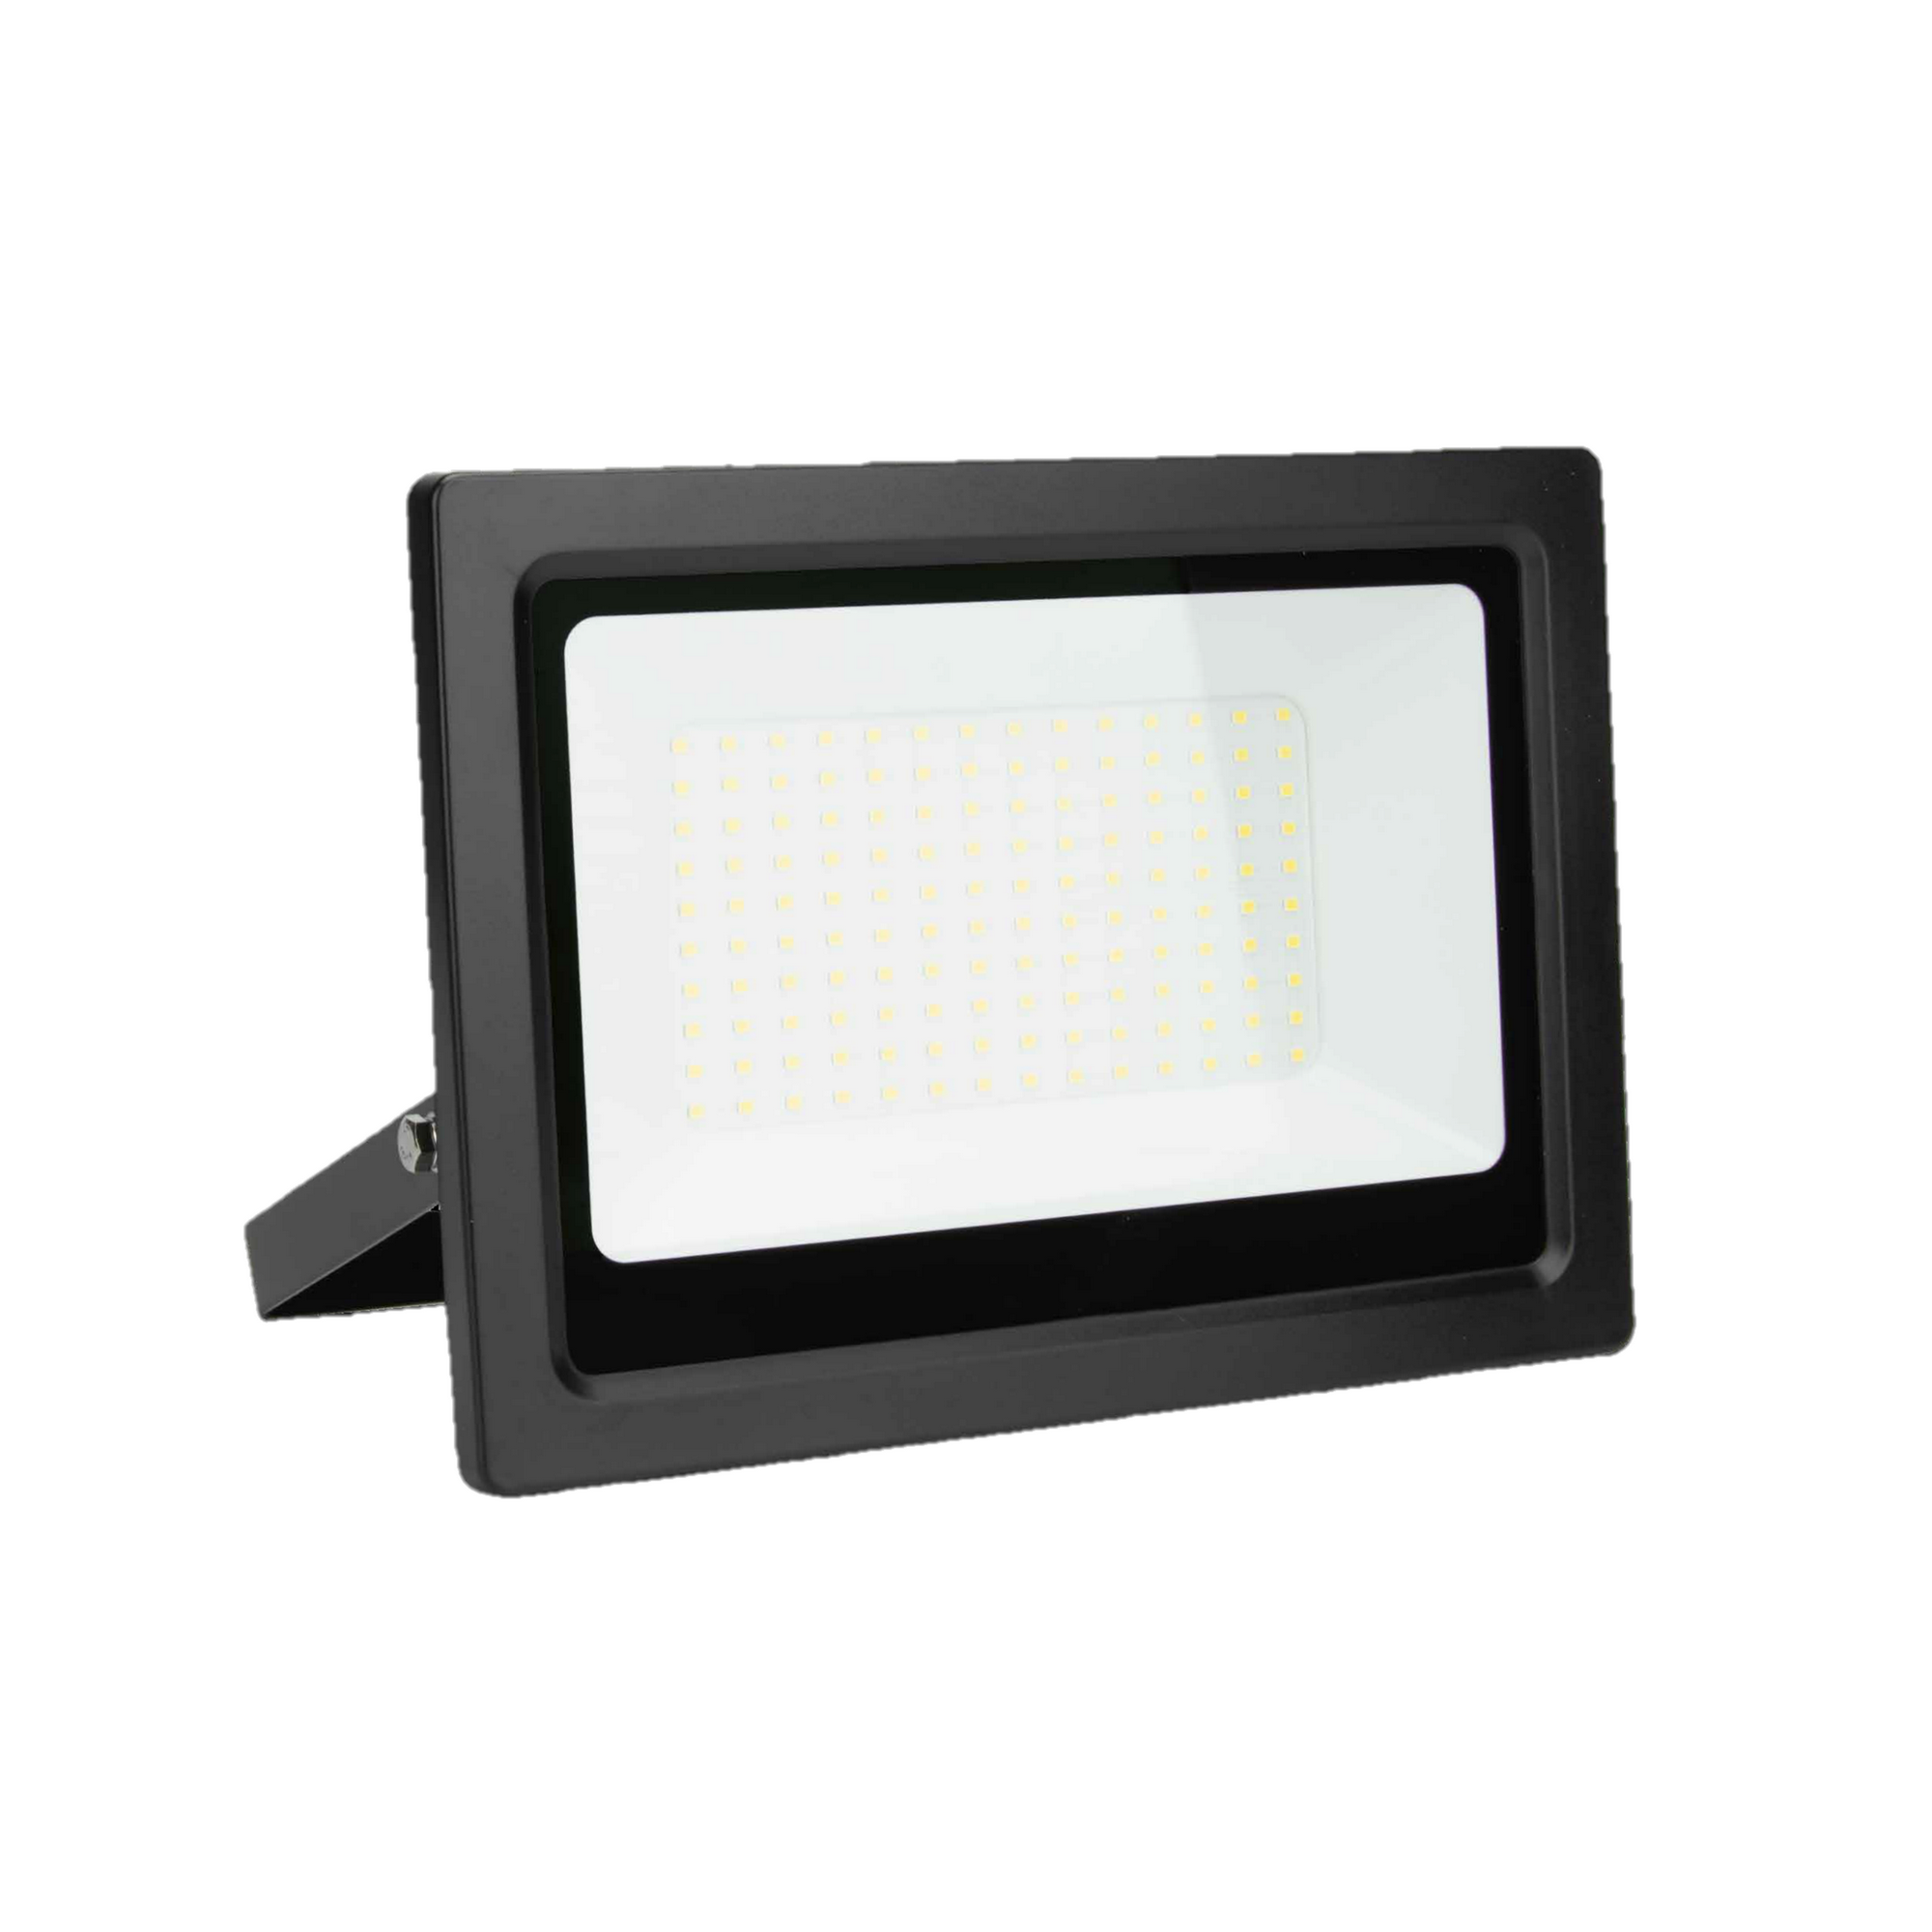 LED-Wandfluter schwarz 100 W 7600 lm + product picture